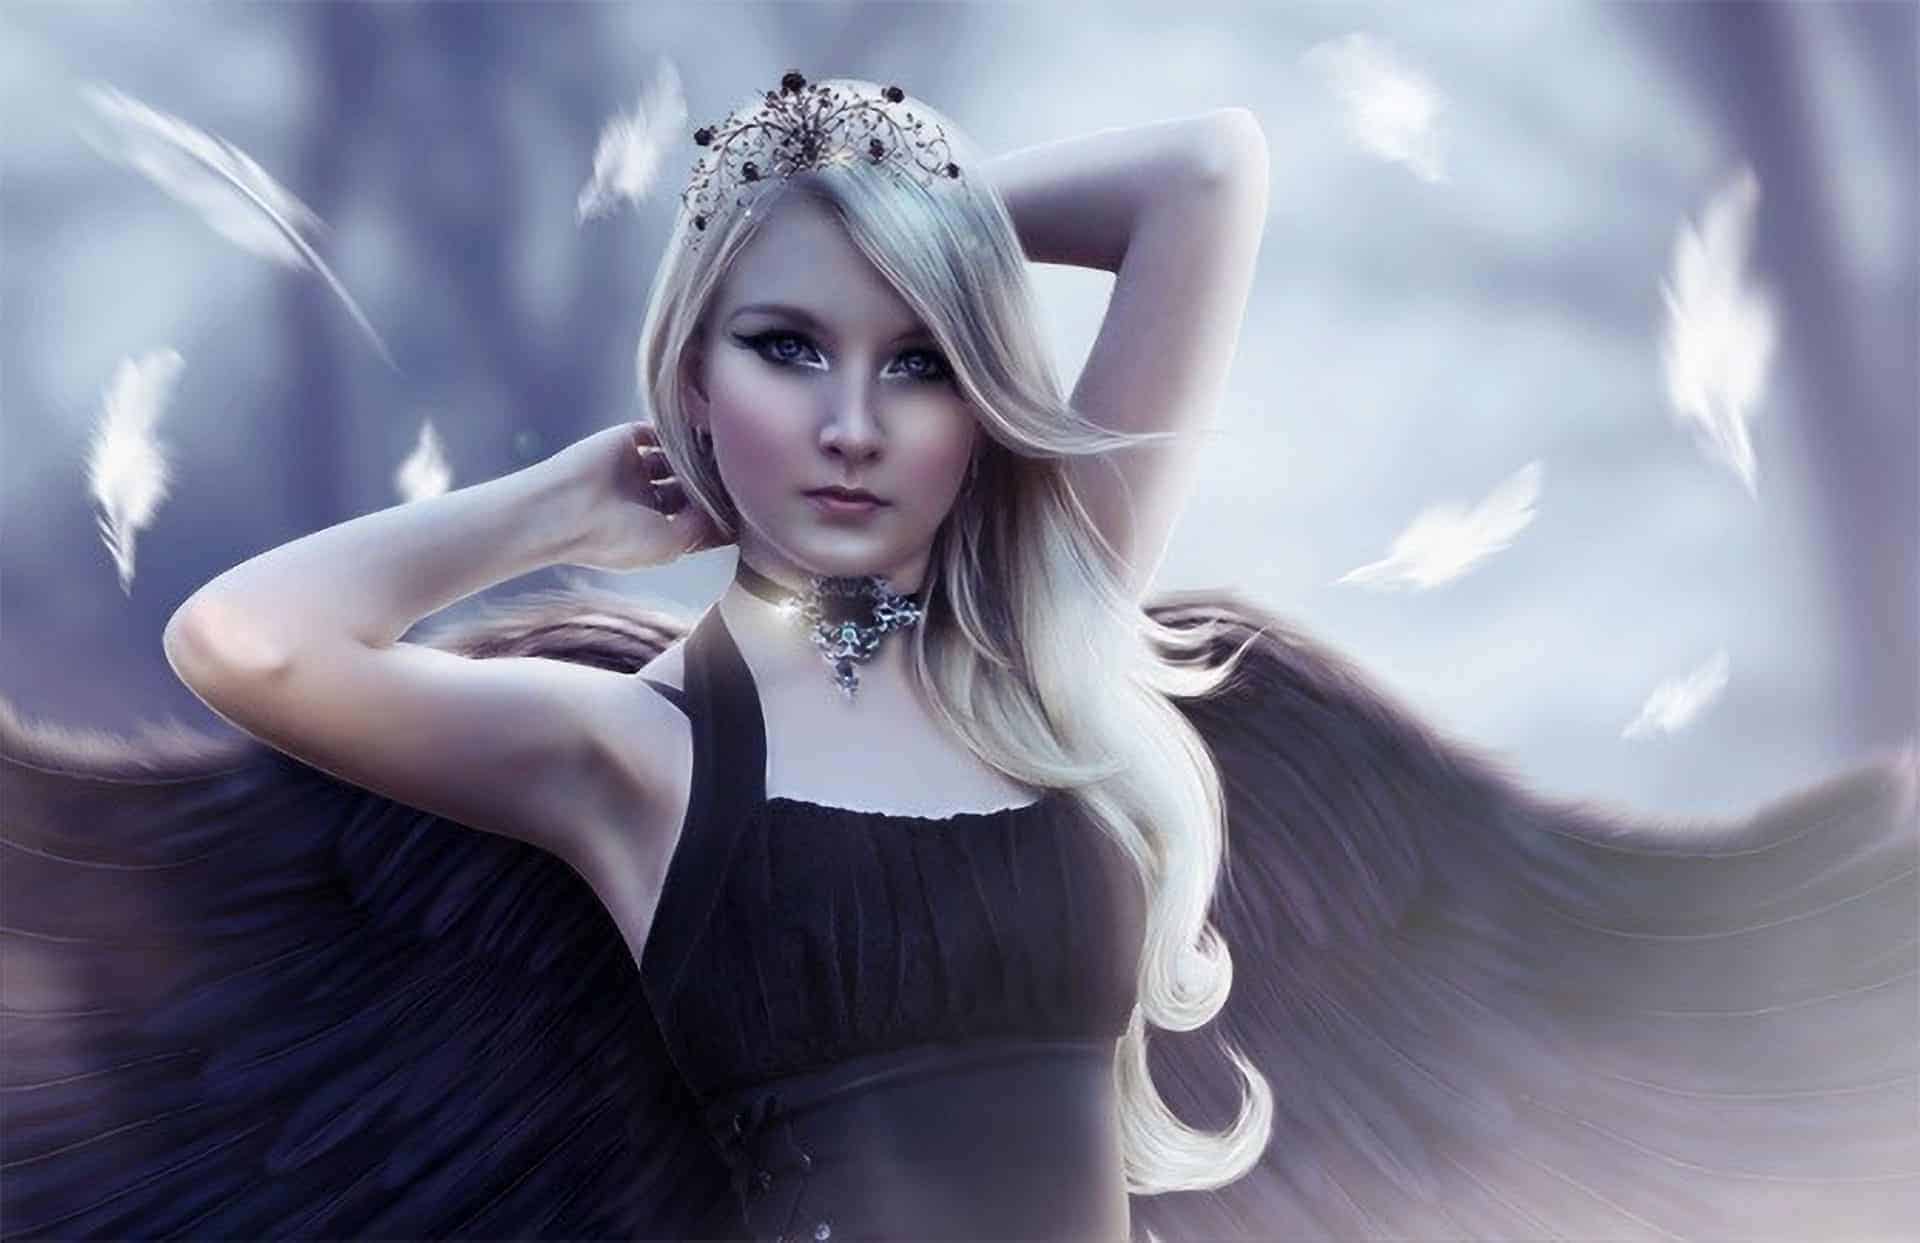 How to Create an Emotional Photo Manipulation of an Angel